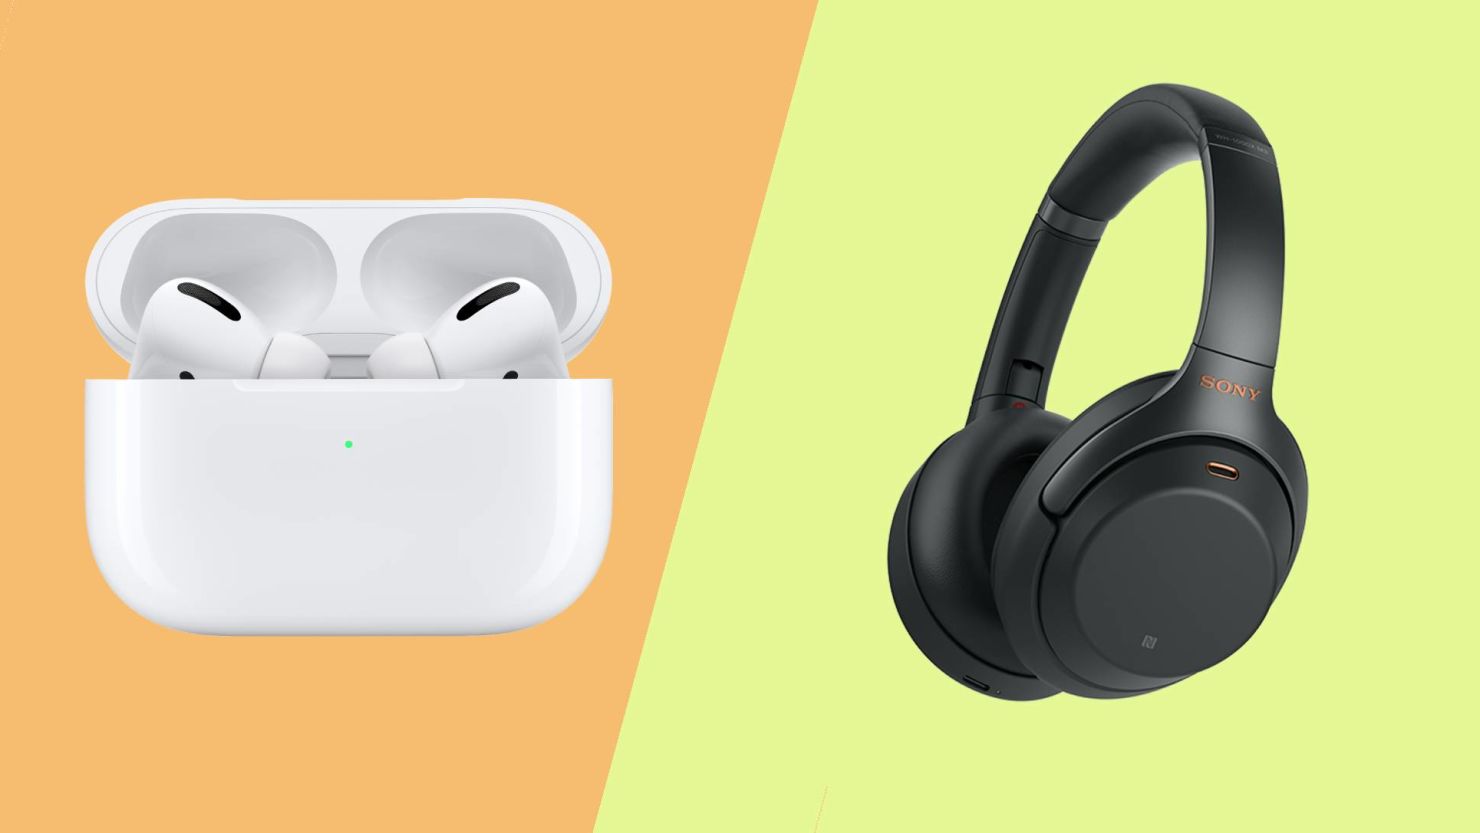 EarPods vs AirPods: Do They Sound Different?